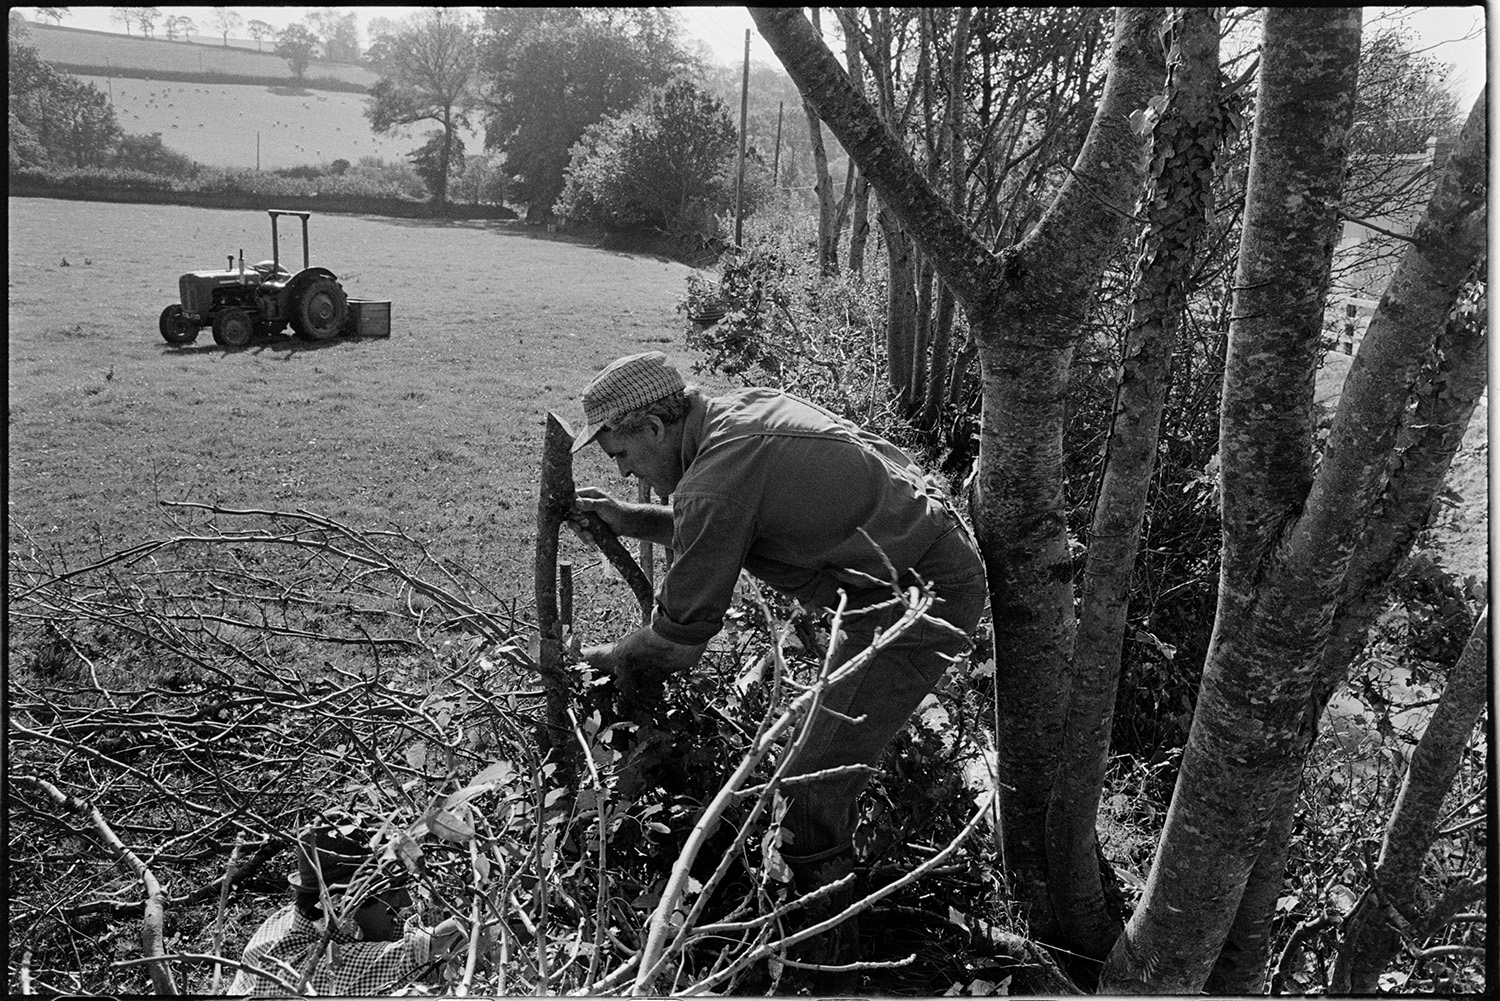 Farmers laying hedge, using wooden crucks to hold it. 
[Alf Pugsley and Stephen Squire hedge laying in a field at Lower Langham, Dolton. Alf Pugsley is stood on the hedge securing a wooden cruck while Stephen Squire is arranging branches underneath. A tractor and link box can be seen in the background.]